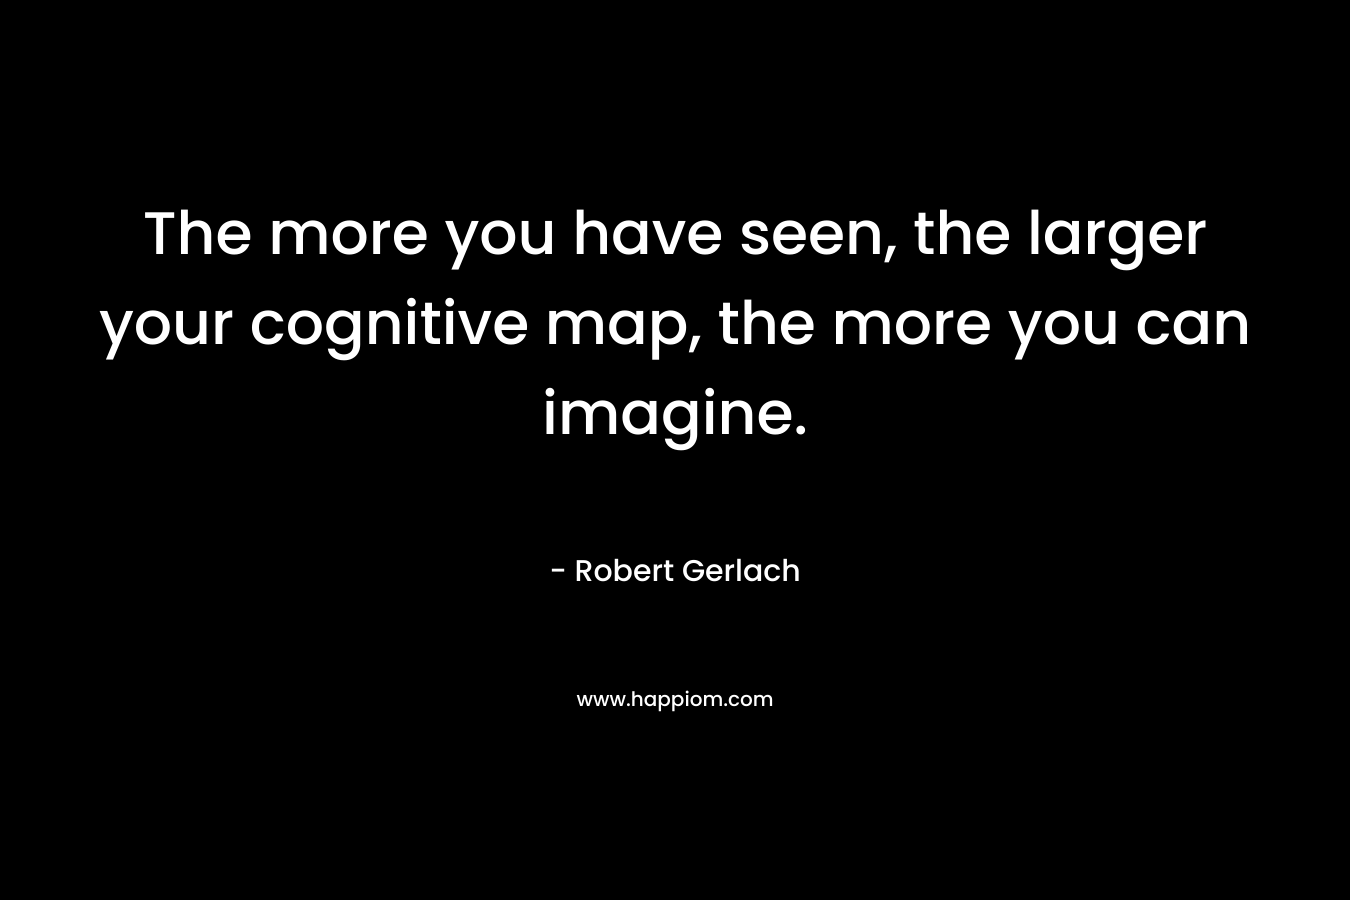 The more you have seen, the larger your cognitive map, the more you can imagine.